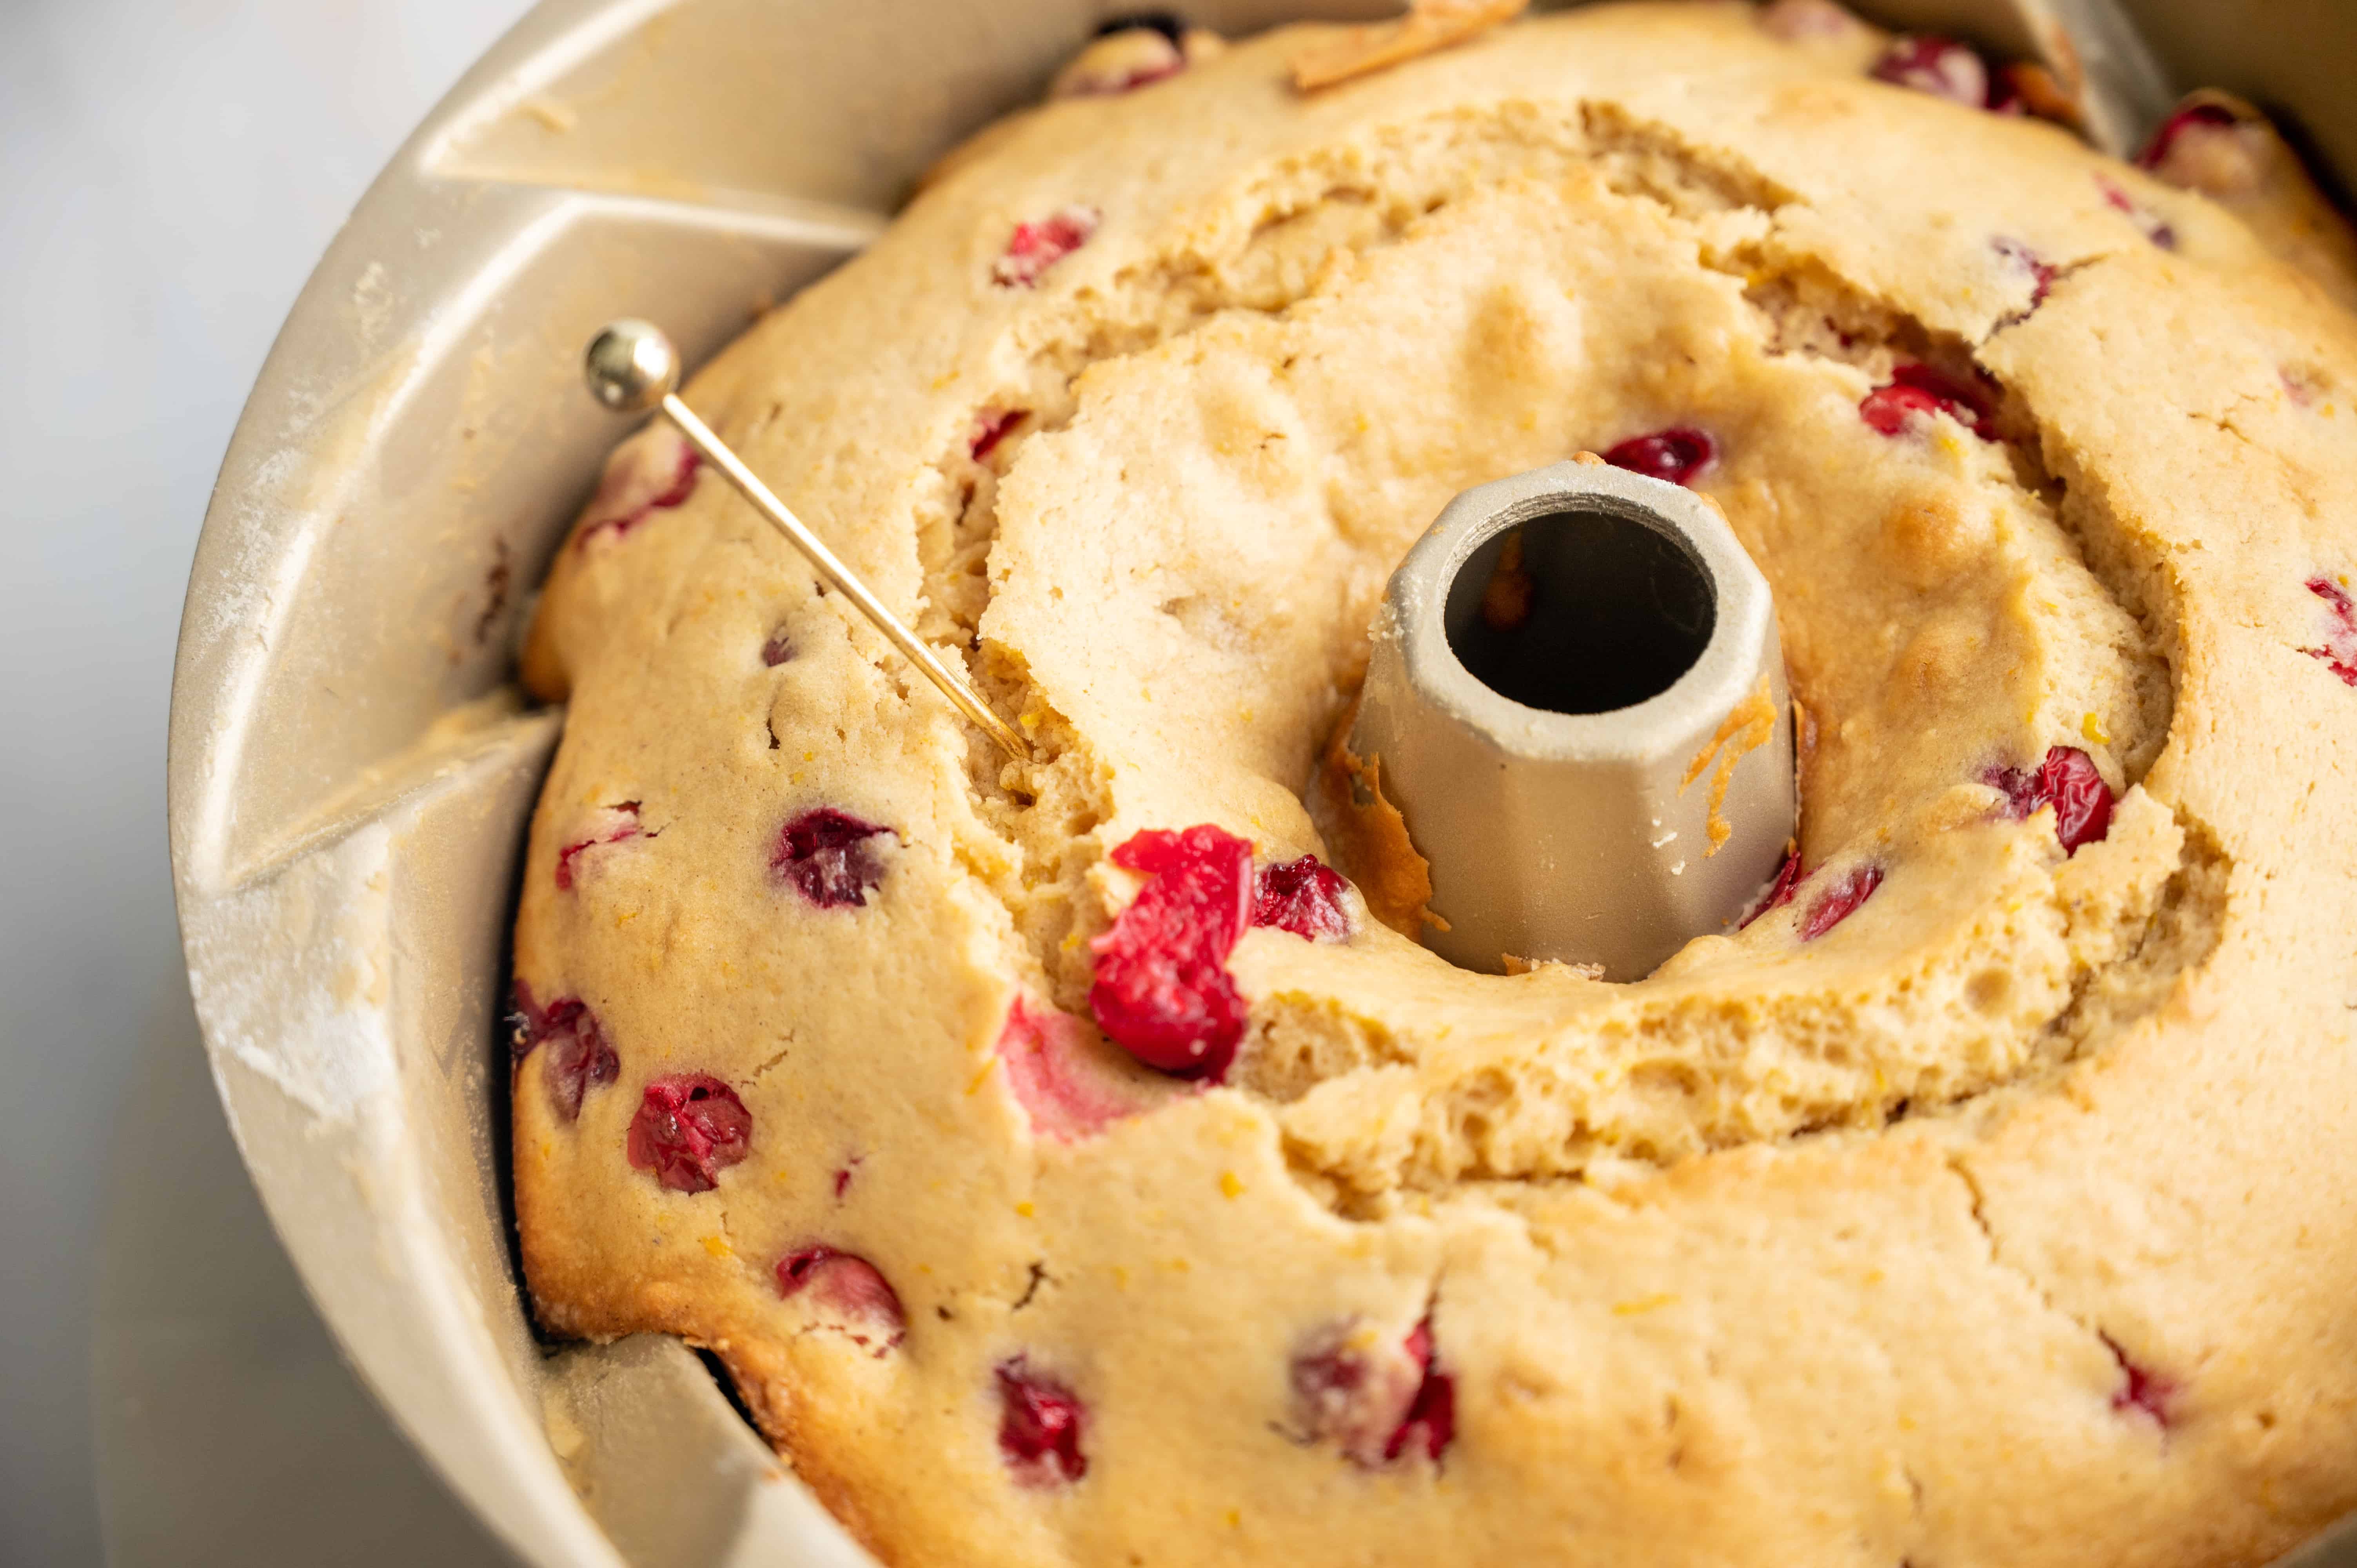 A baked bundt cake with a pin sticking out.